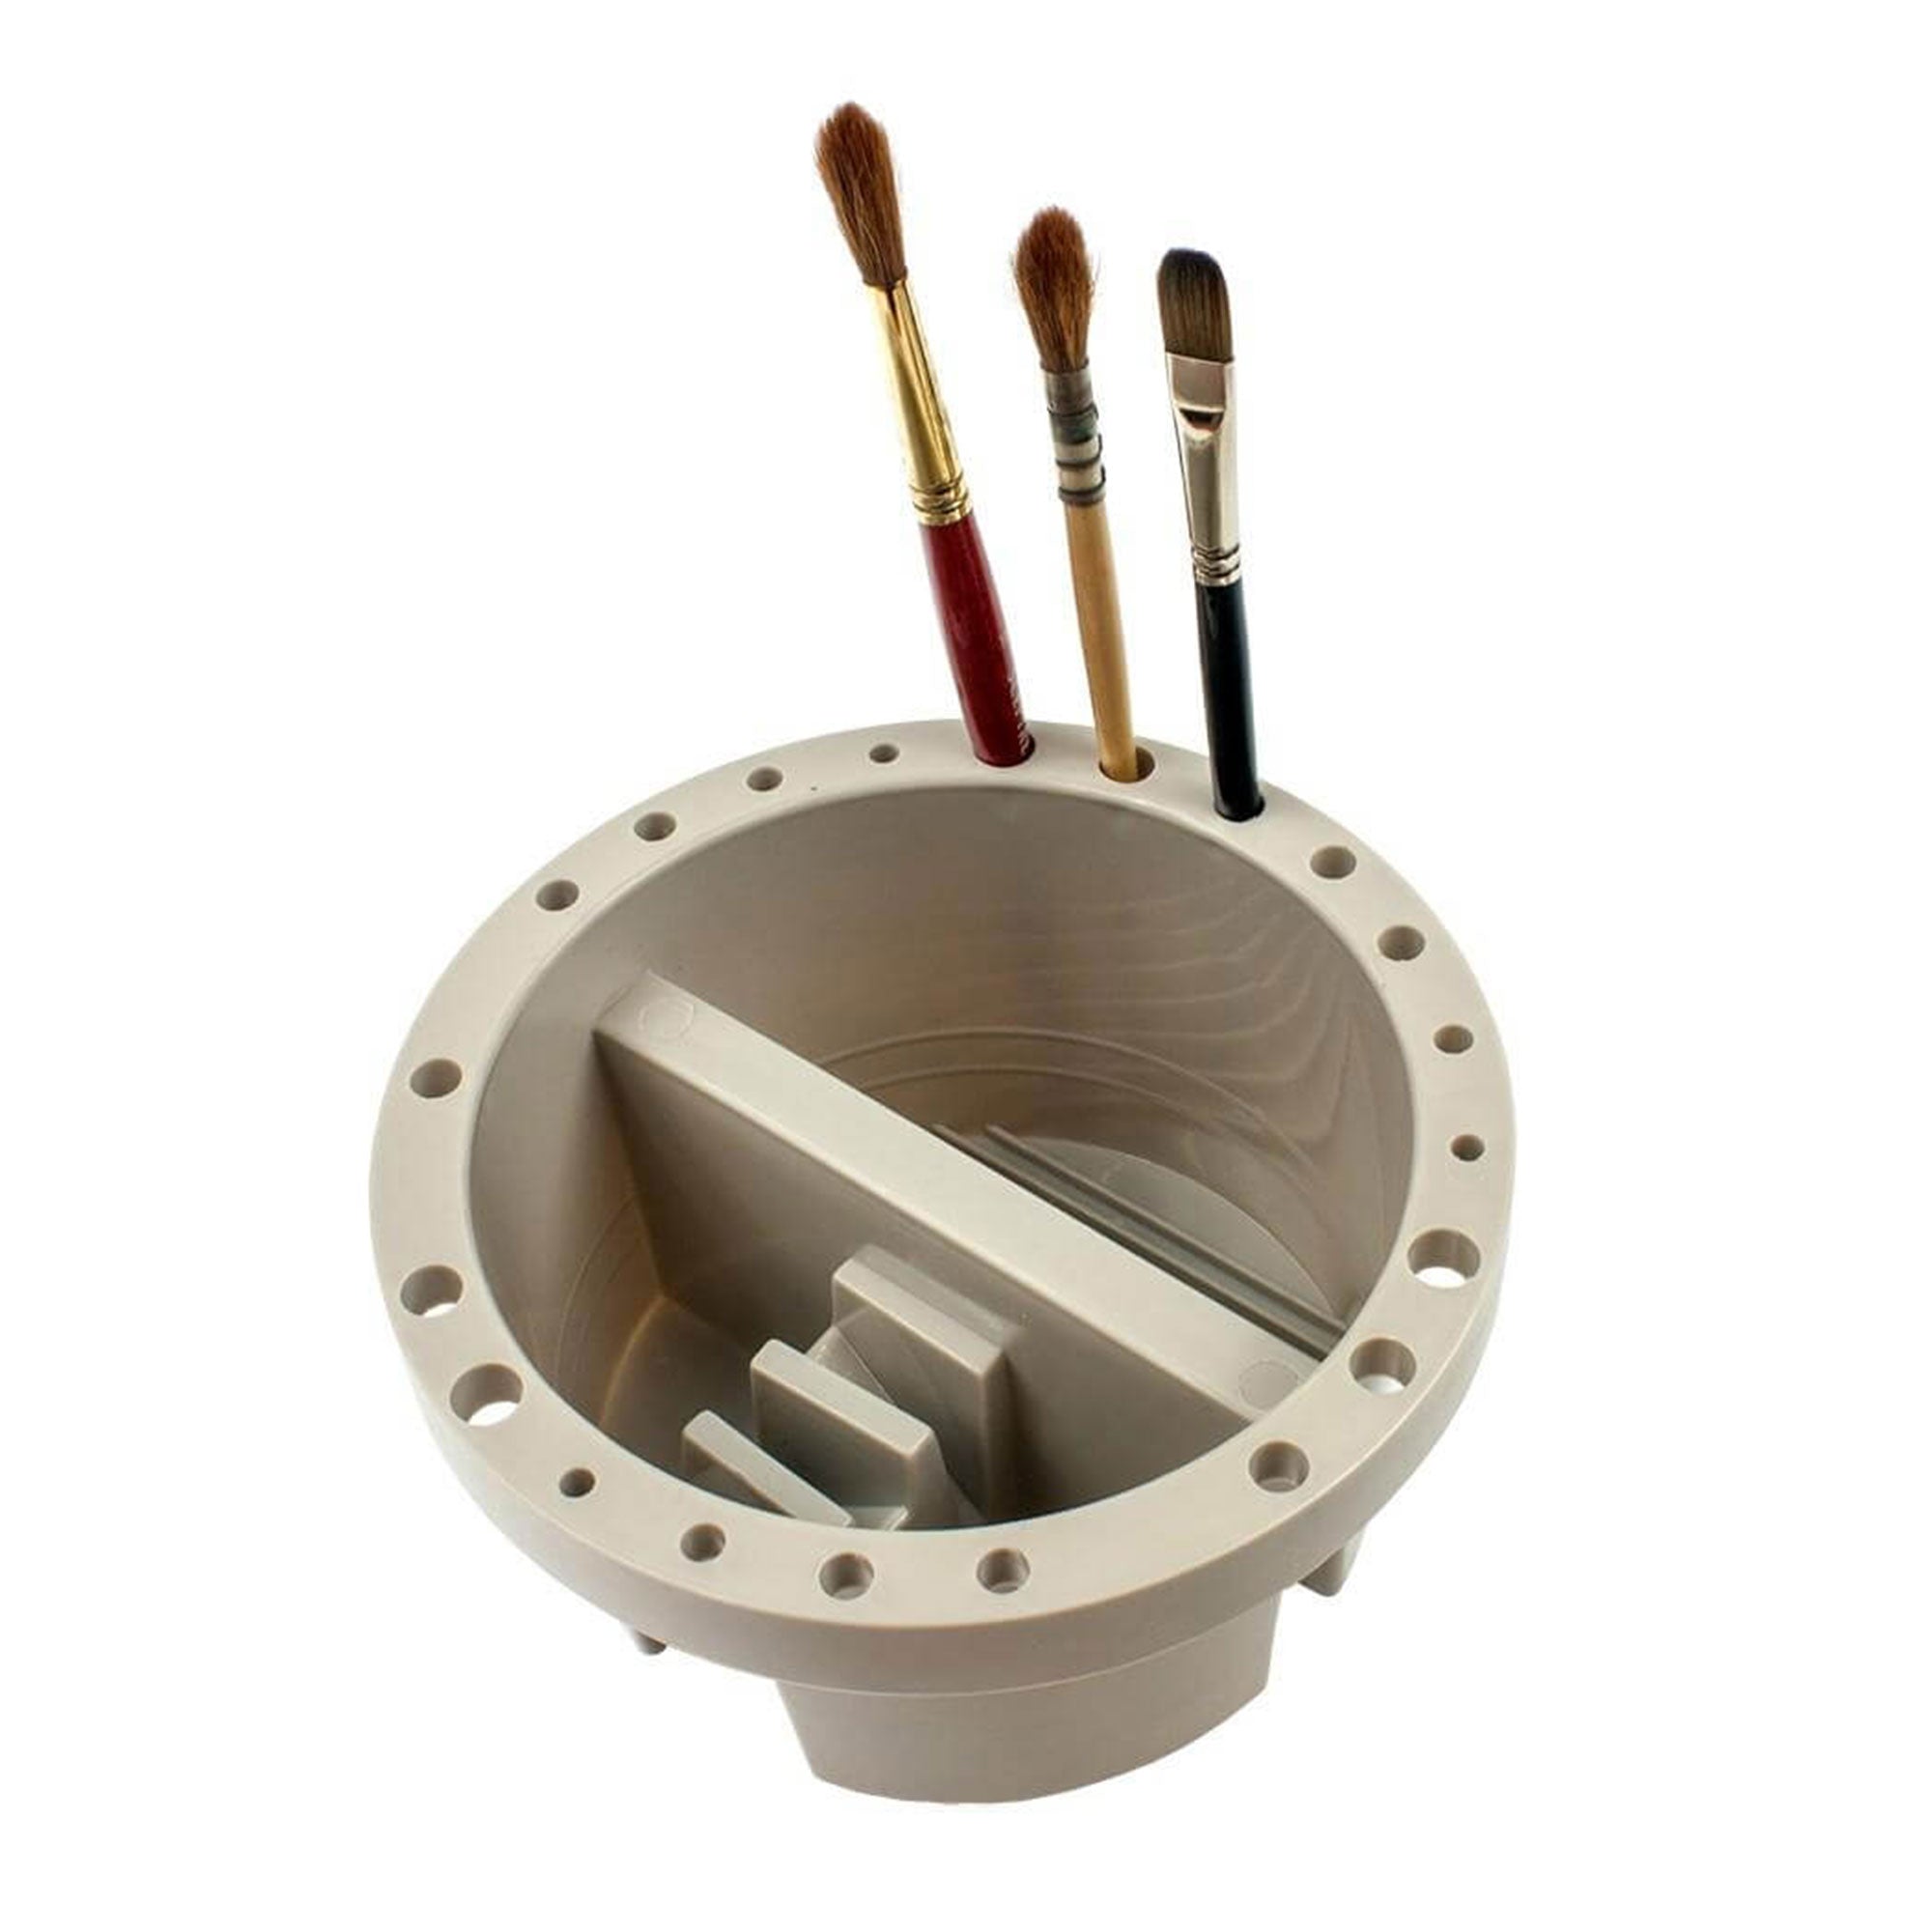 Jakar Artists’ Brush Tub with example brushes (not included)